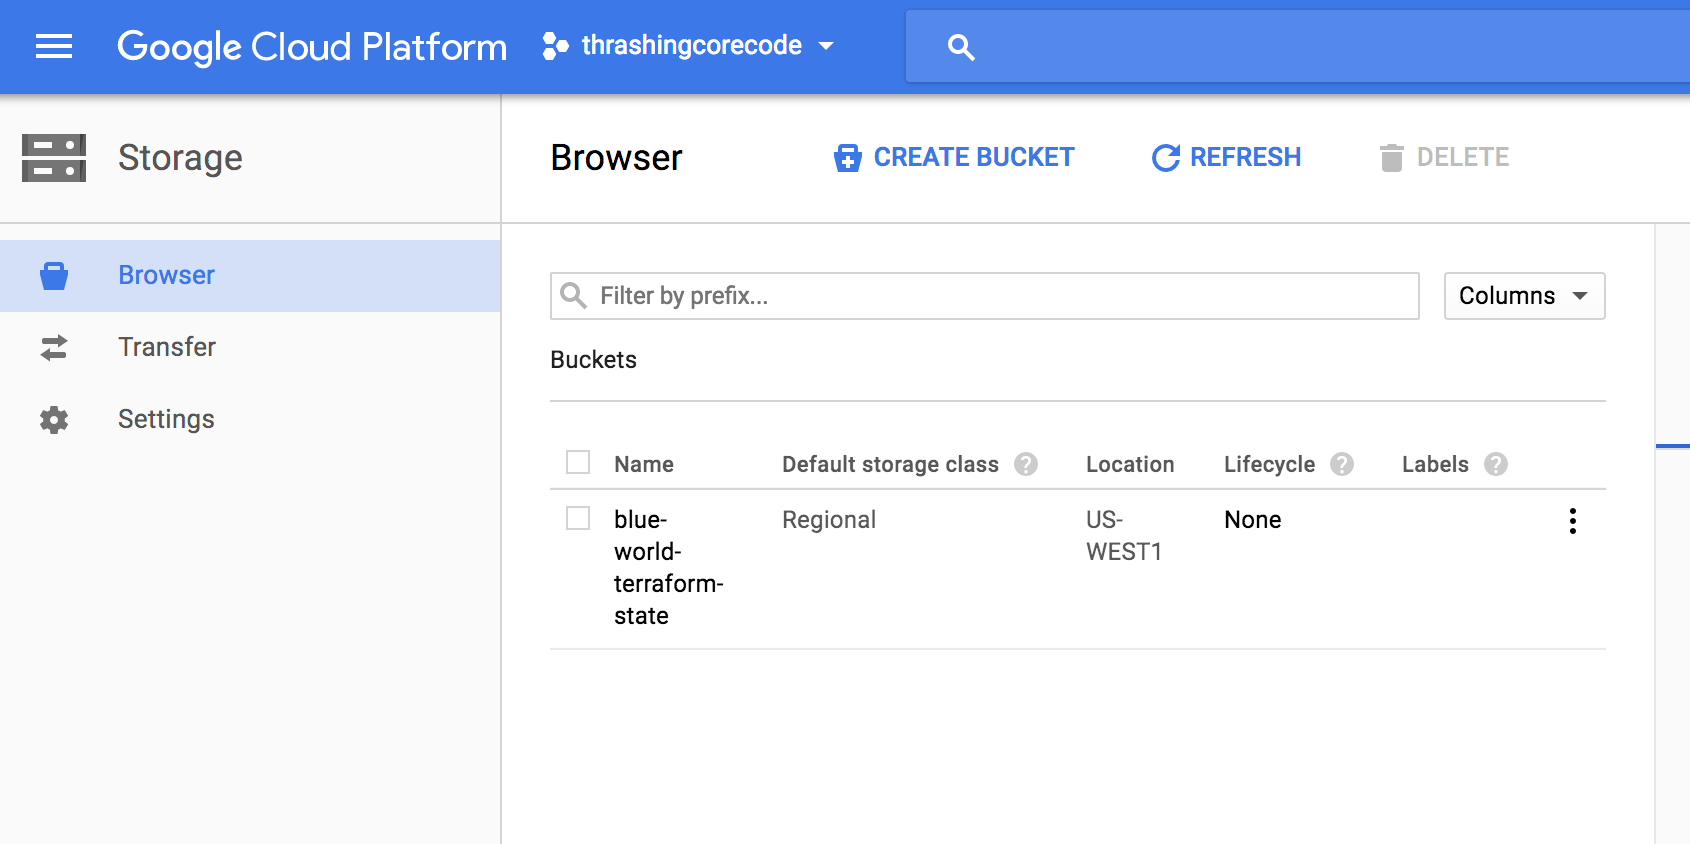 Shown in GCP Interface